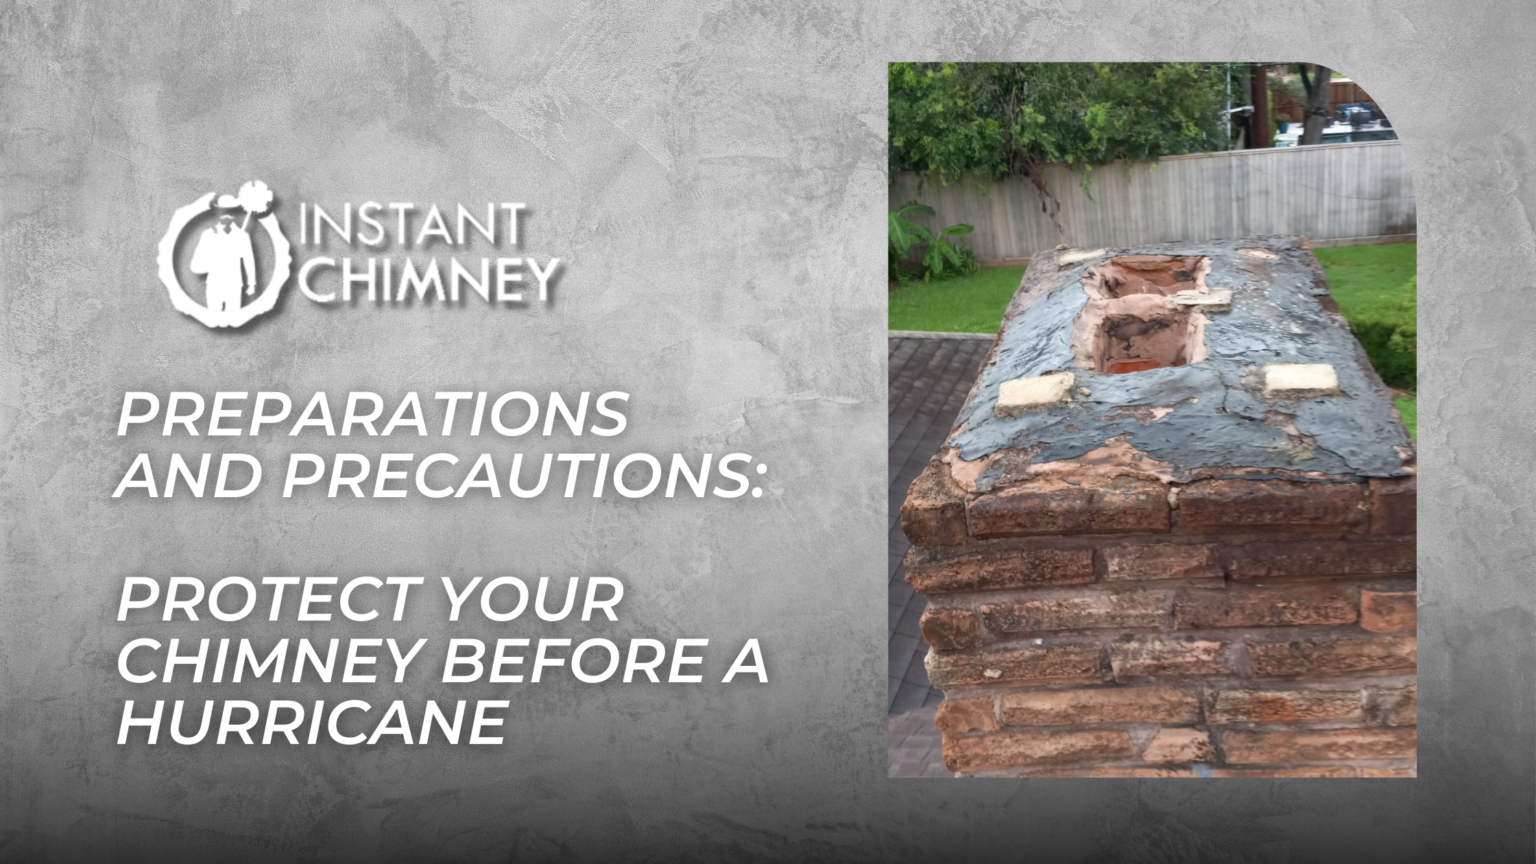 Preparations and Precautions: Protect Your Chimney Before a Hurricane